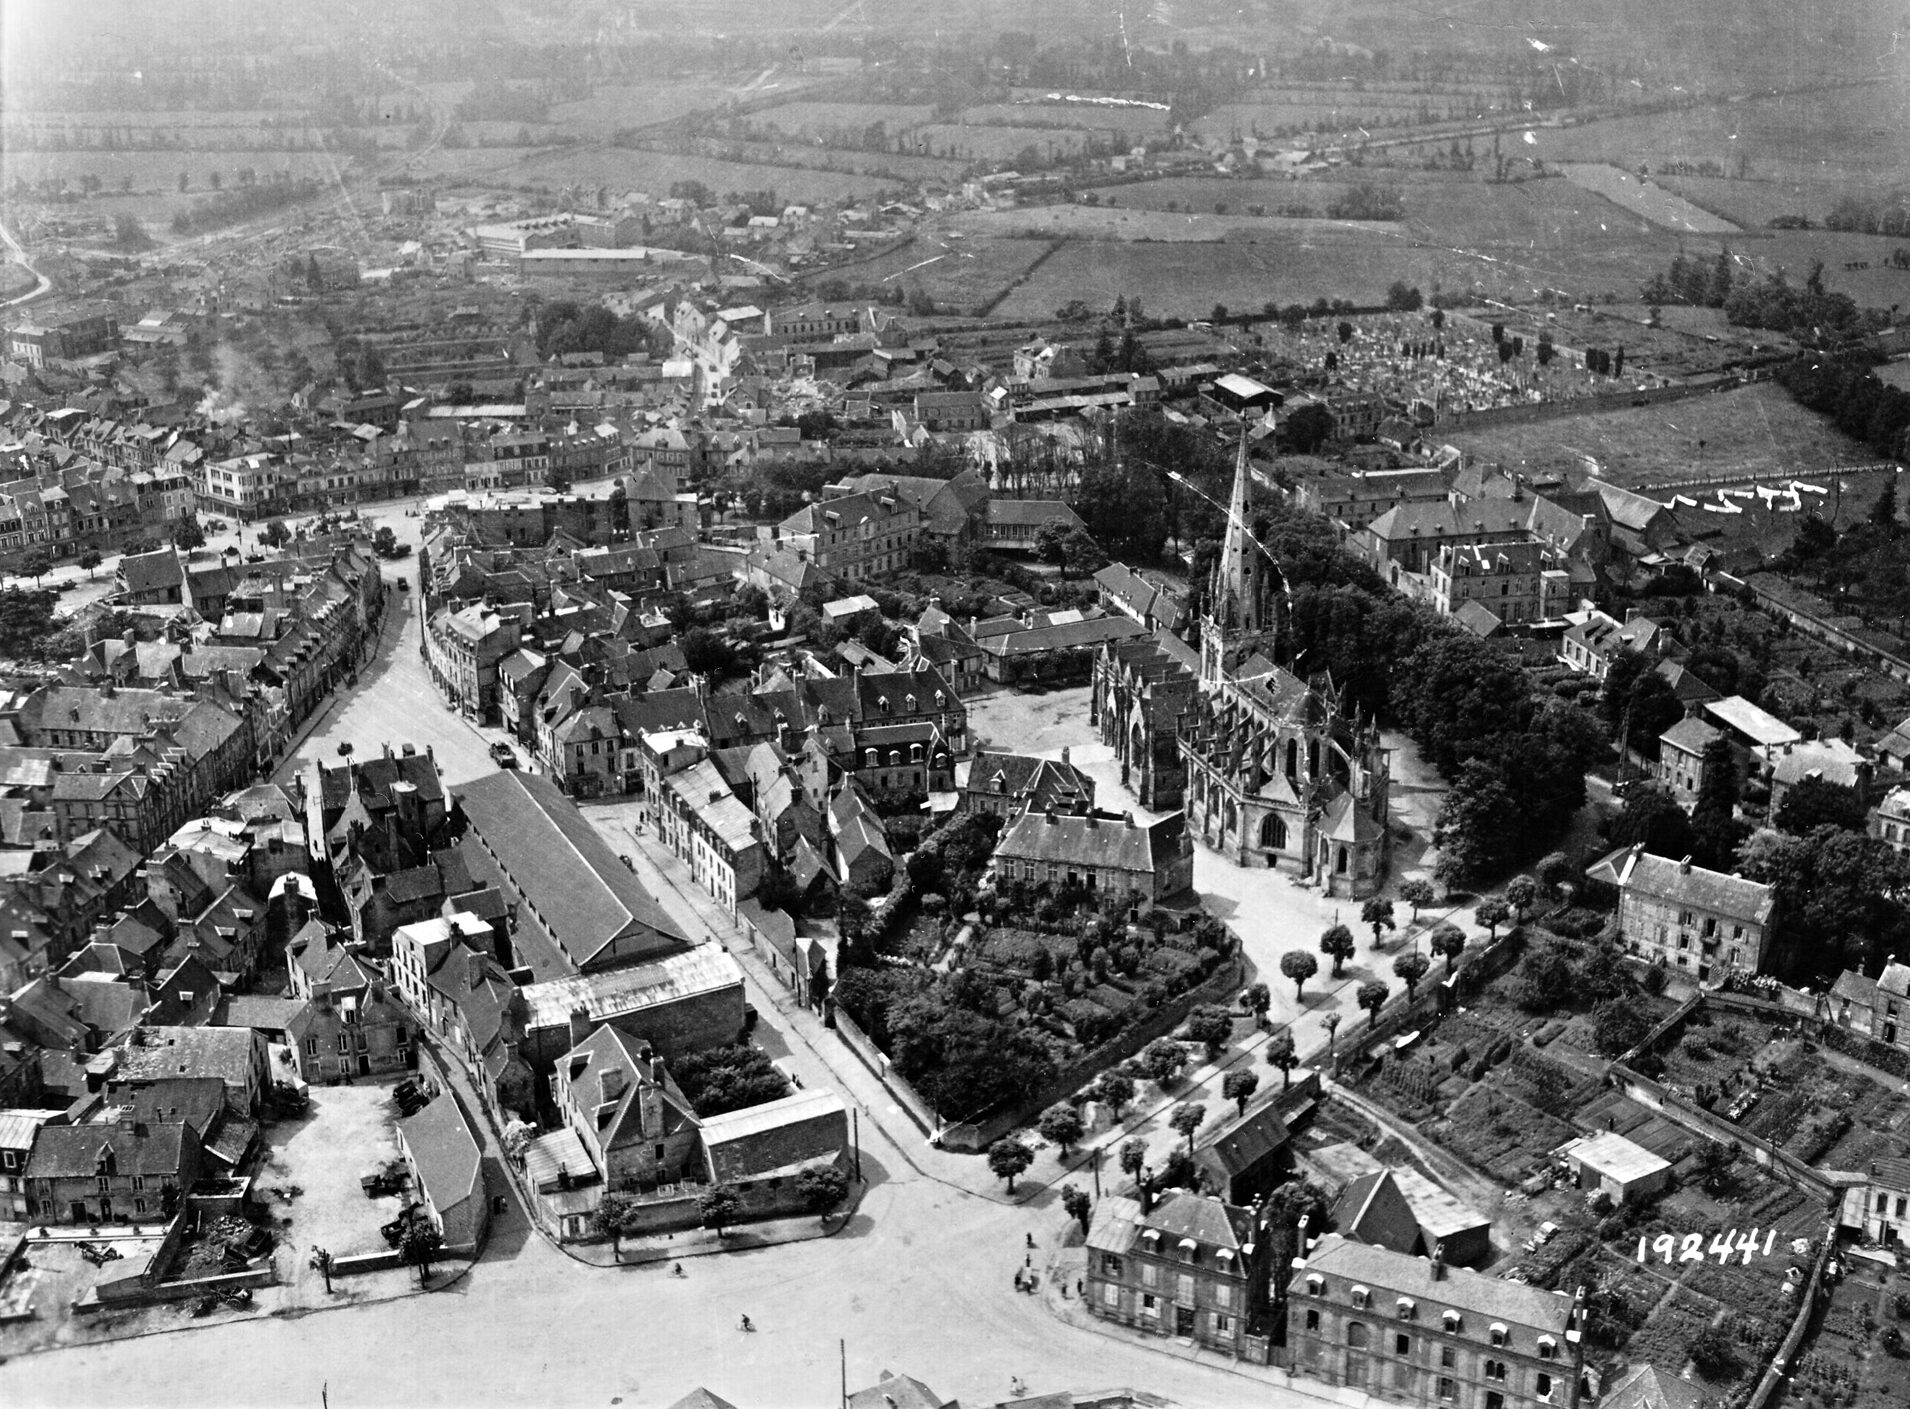 This aerial photo of Carentan, a strategically important location, taken three weeks after the fighting ended, shows little apparent damage.